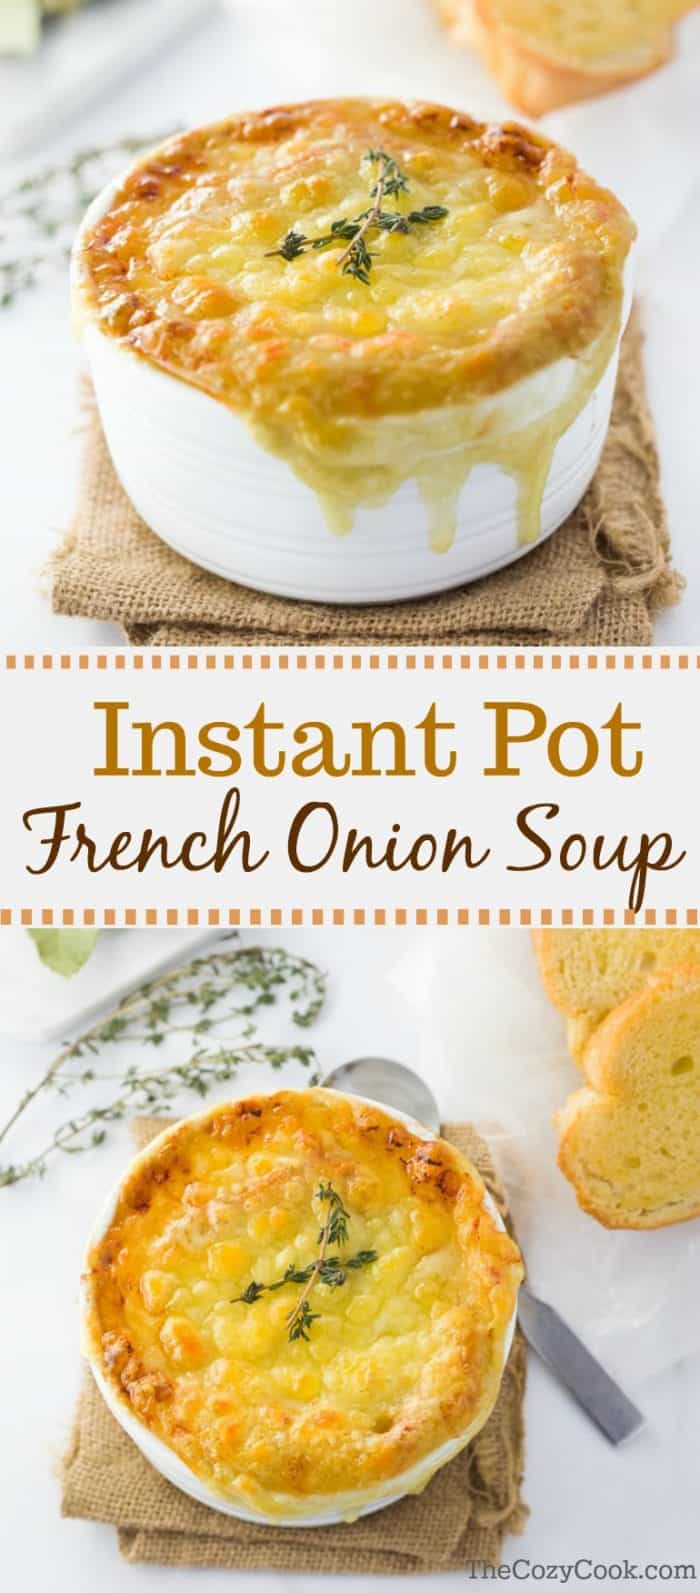 This instant pot french onion soup features perfectly caramelized onions in a rich, dark broth topped with a toasted baguette and hot and bubbly Gruyere cheese. | The Cozy Cook | #Soup #ad #FrenchOnionSoup #InstantPot #Onions #BeefBroth #Dinner #Gruyere #ComfortFood